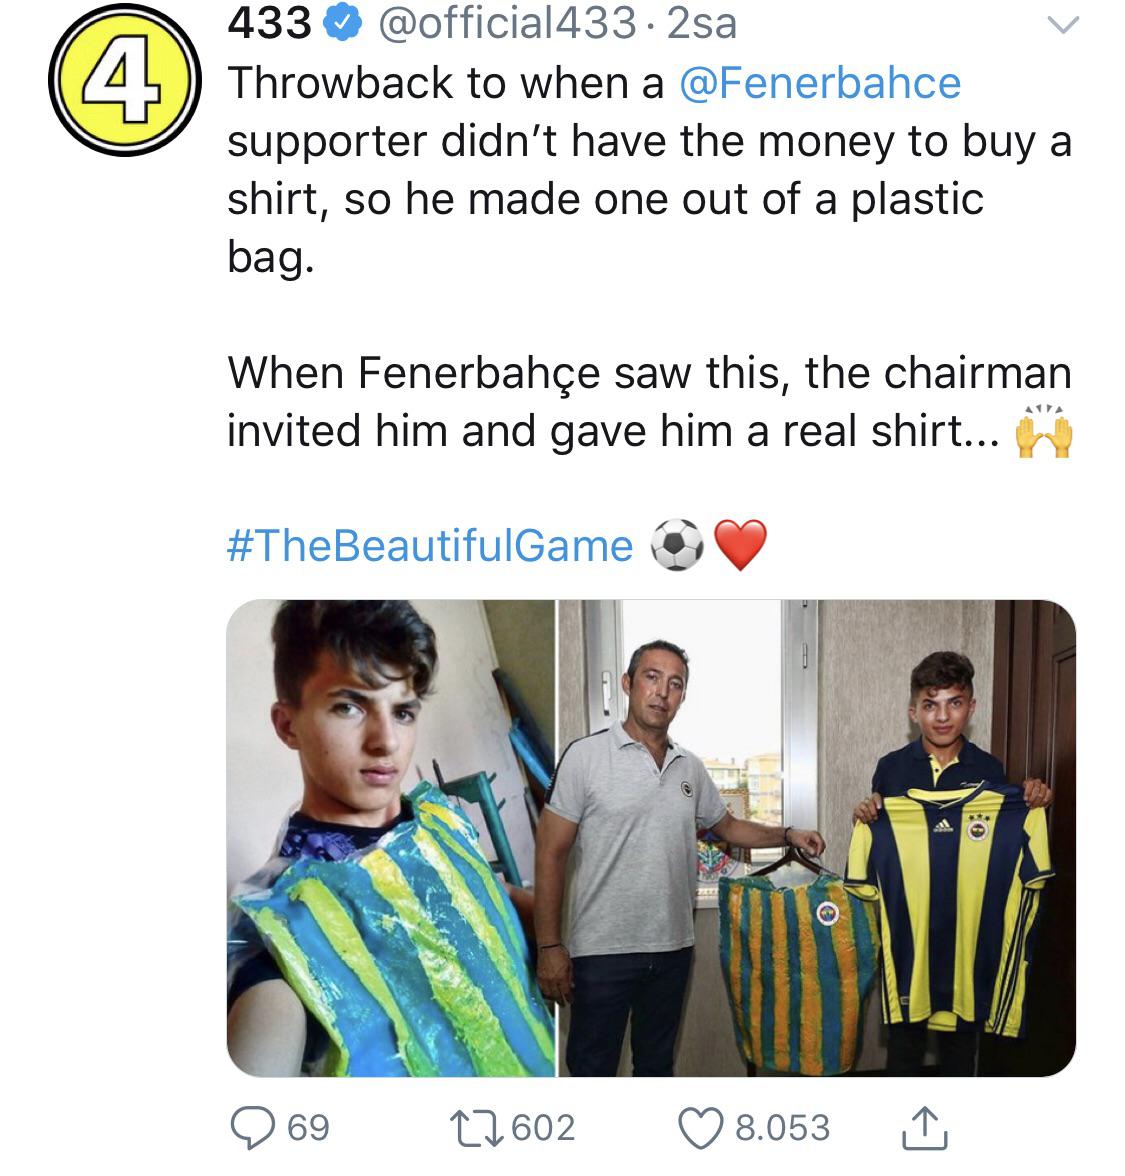 human behavior - 433 .2sa Throwback to when a supporter didn't have the money to buy a shirt, so he made one out of a plastic bag. When Fenerbahe saw this, the chairman invited him and gave him a real shirt... 9 69 22602 8.053